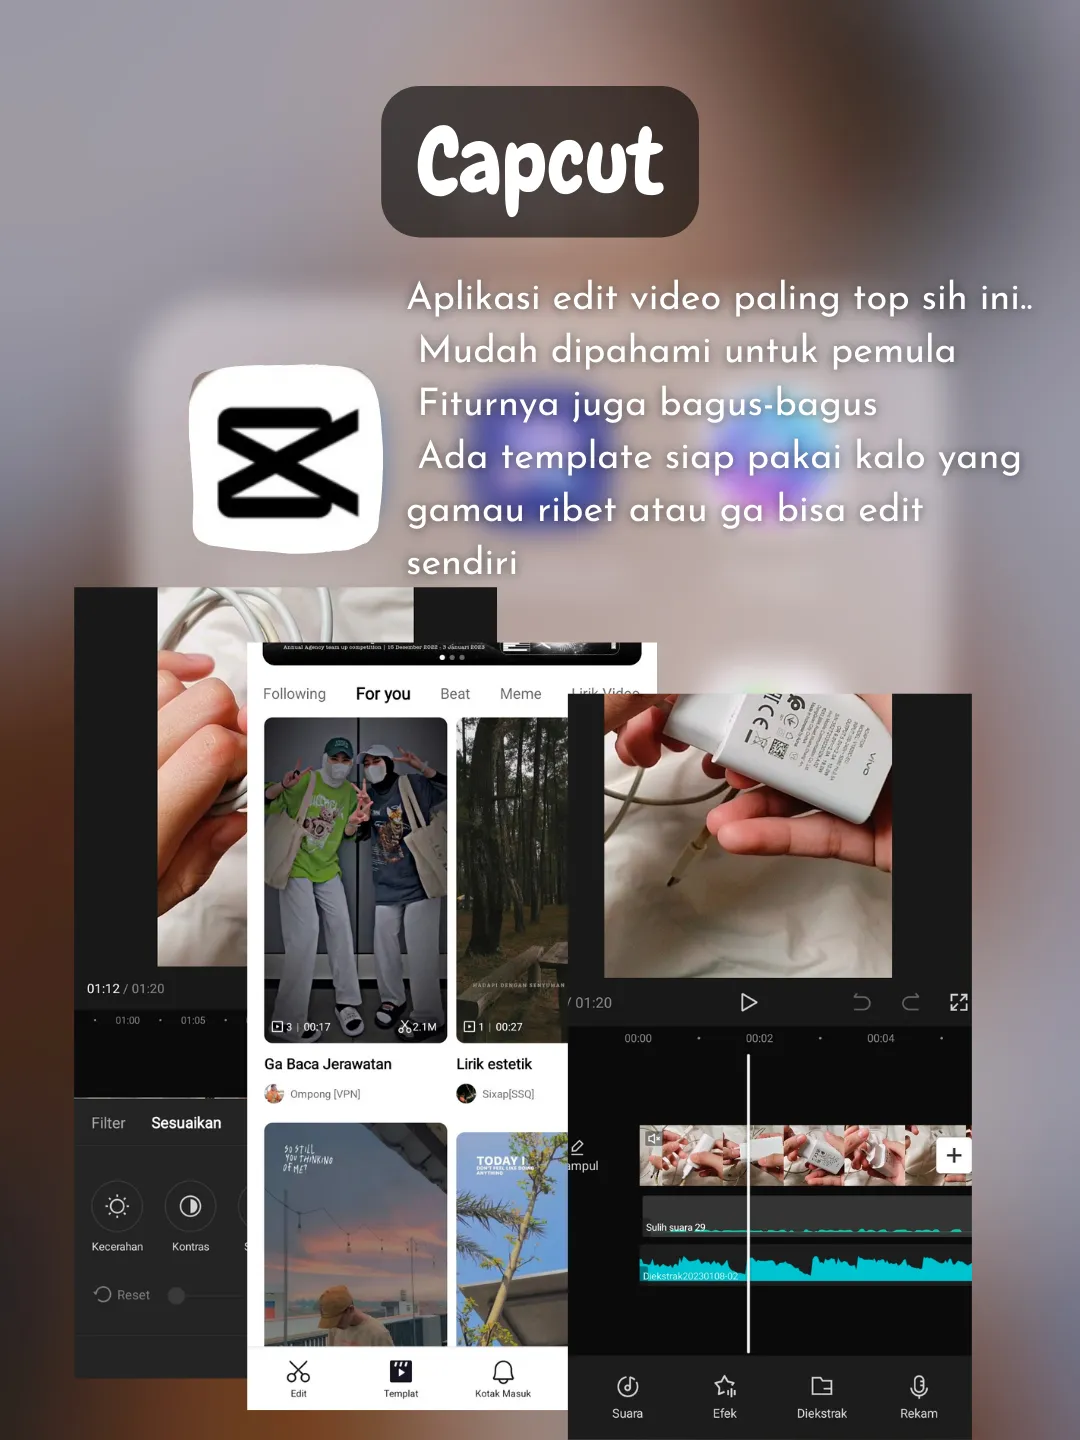 20 Photo Editing Apps For Students